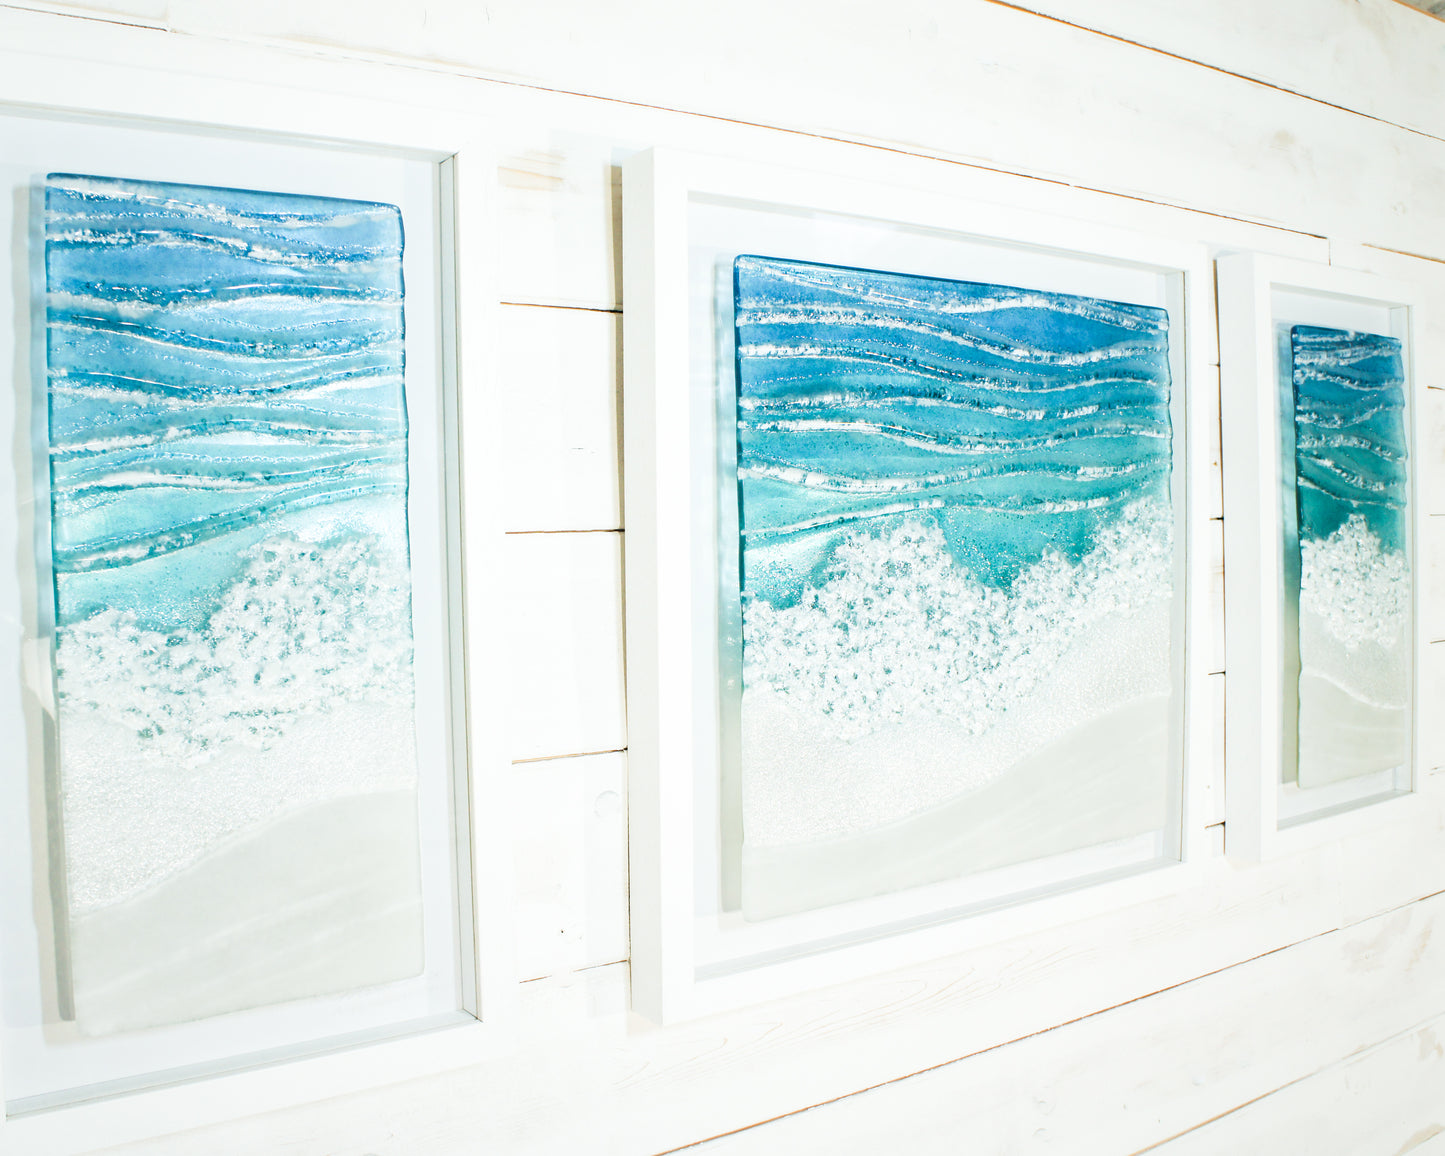 Triptych Toe Tickling Tide Frames - 2 at 25cmx45cm(10x17") + 1 at 45x45cm(17x17") | 3 Wave Large Sea Beach Lighthouse Fused Glass Frames